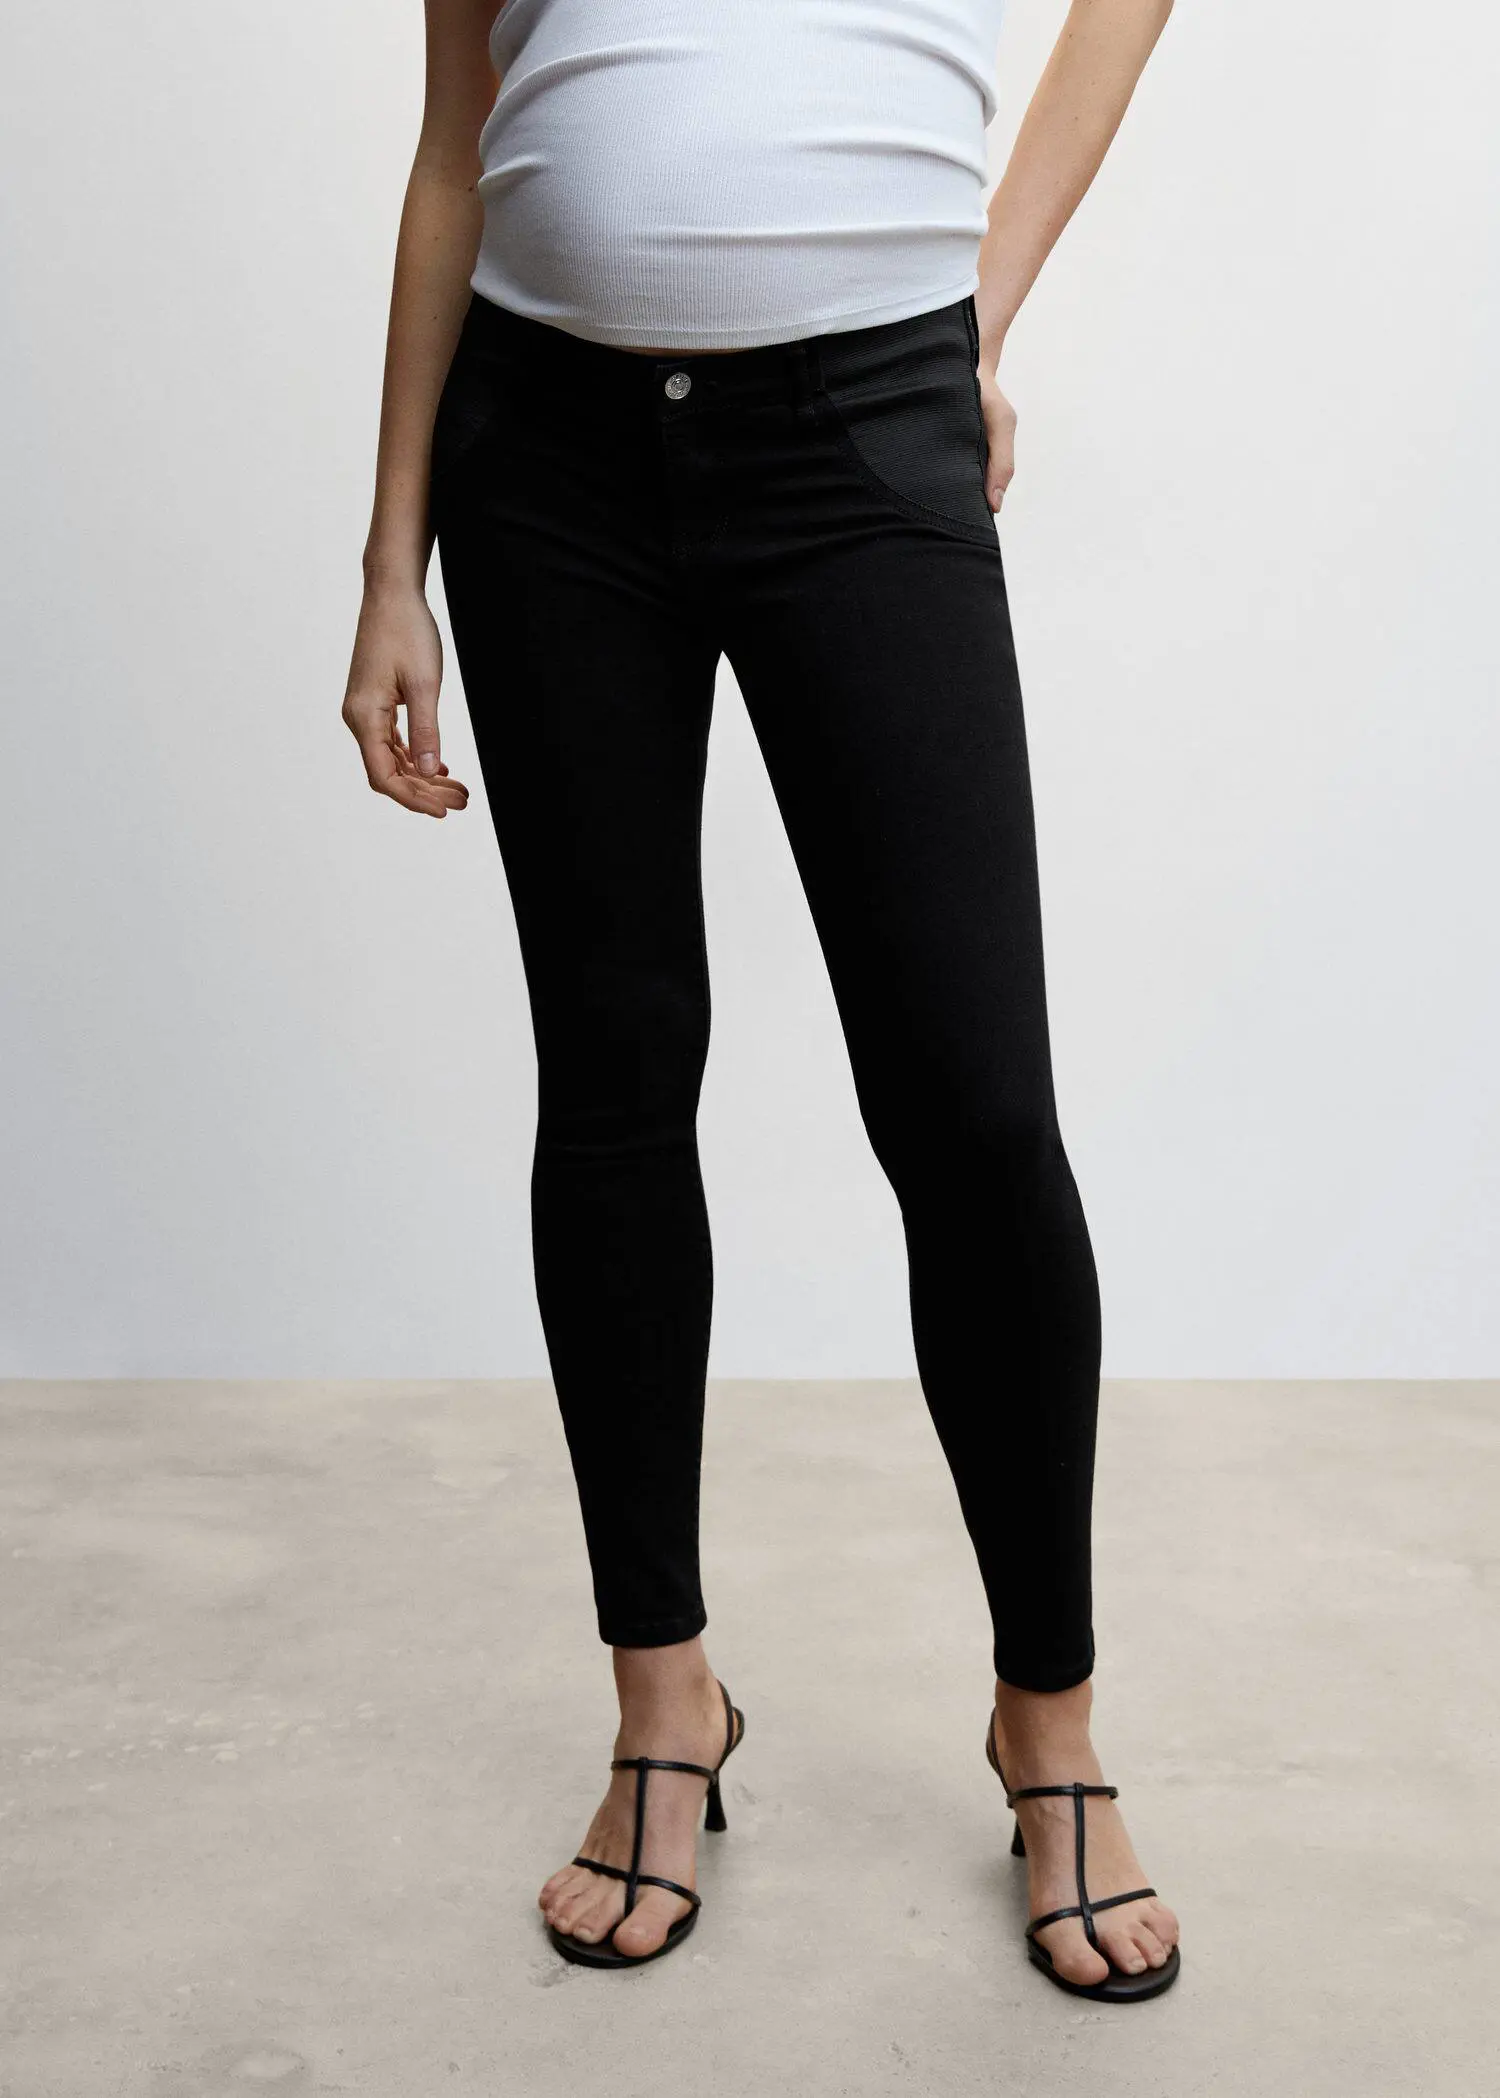 Mango Maternity skinny jeans. a woman wearing black pants and black shoes. 